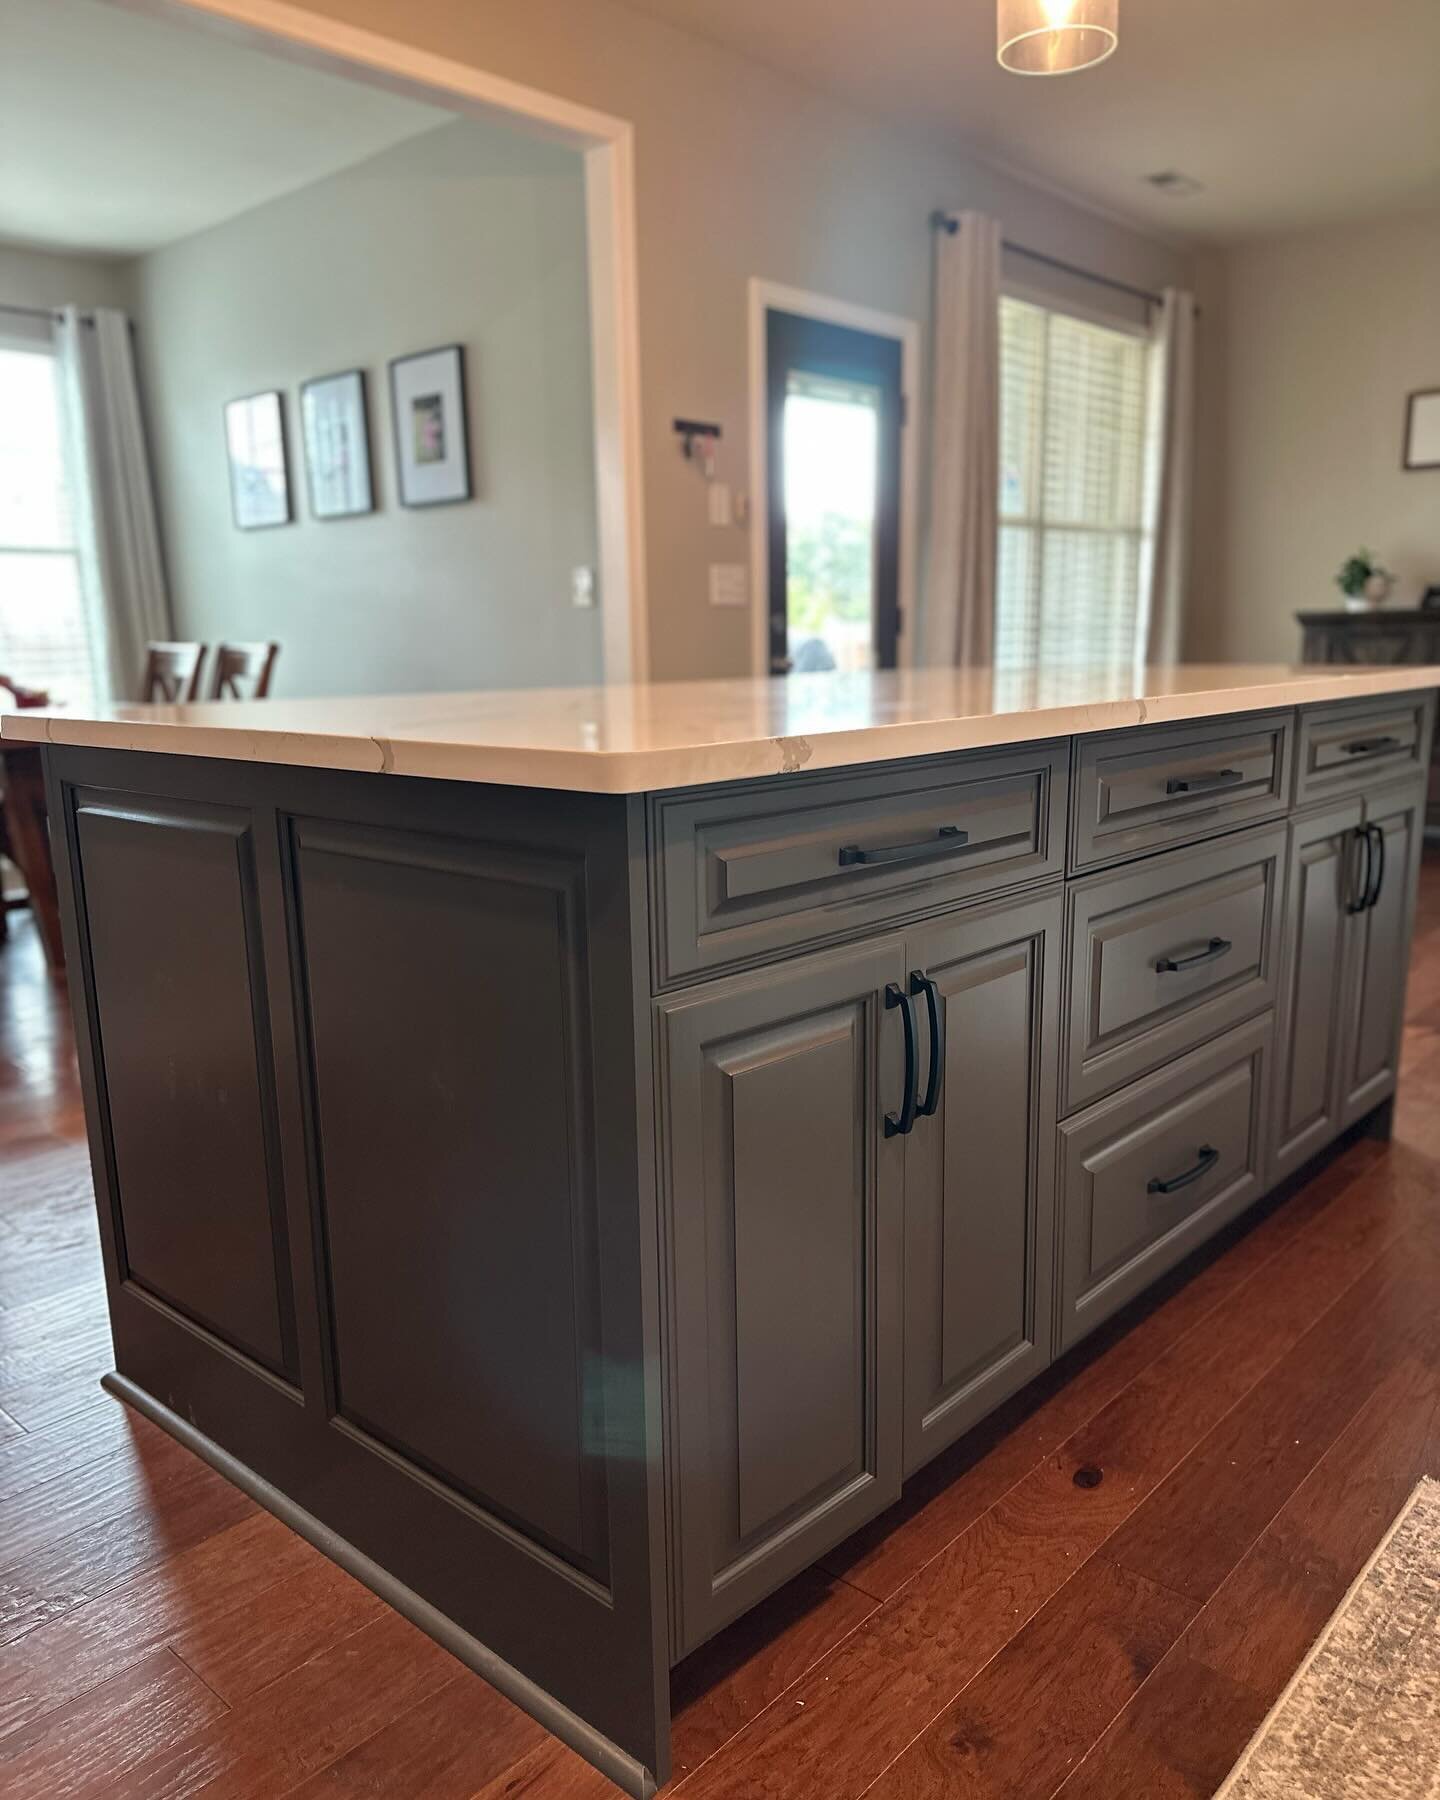 The cherry on top is the counter top. Finished pictures of a recent island install!

Doors: @conestoga_wood CRP-10 
Finish: @sherwinwilliams Gallery Urbane Bronze